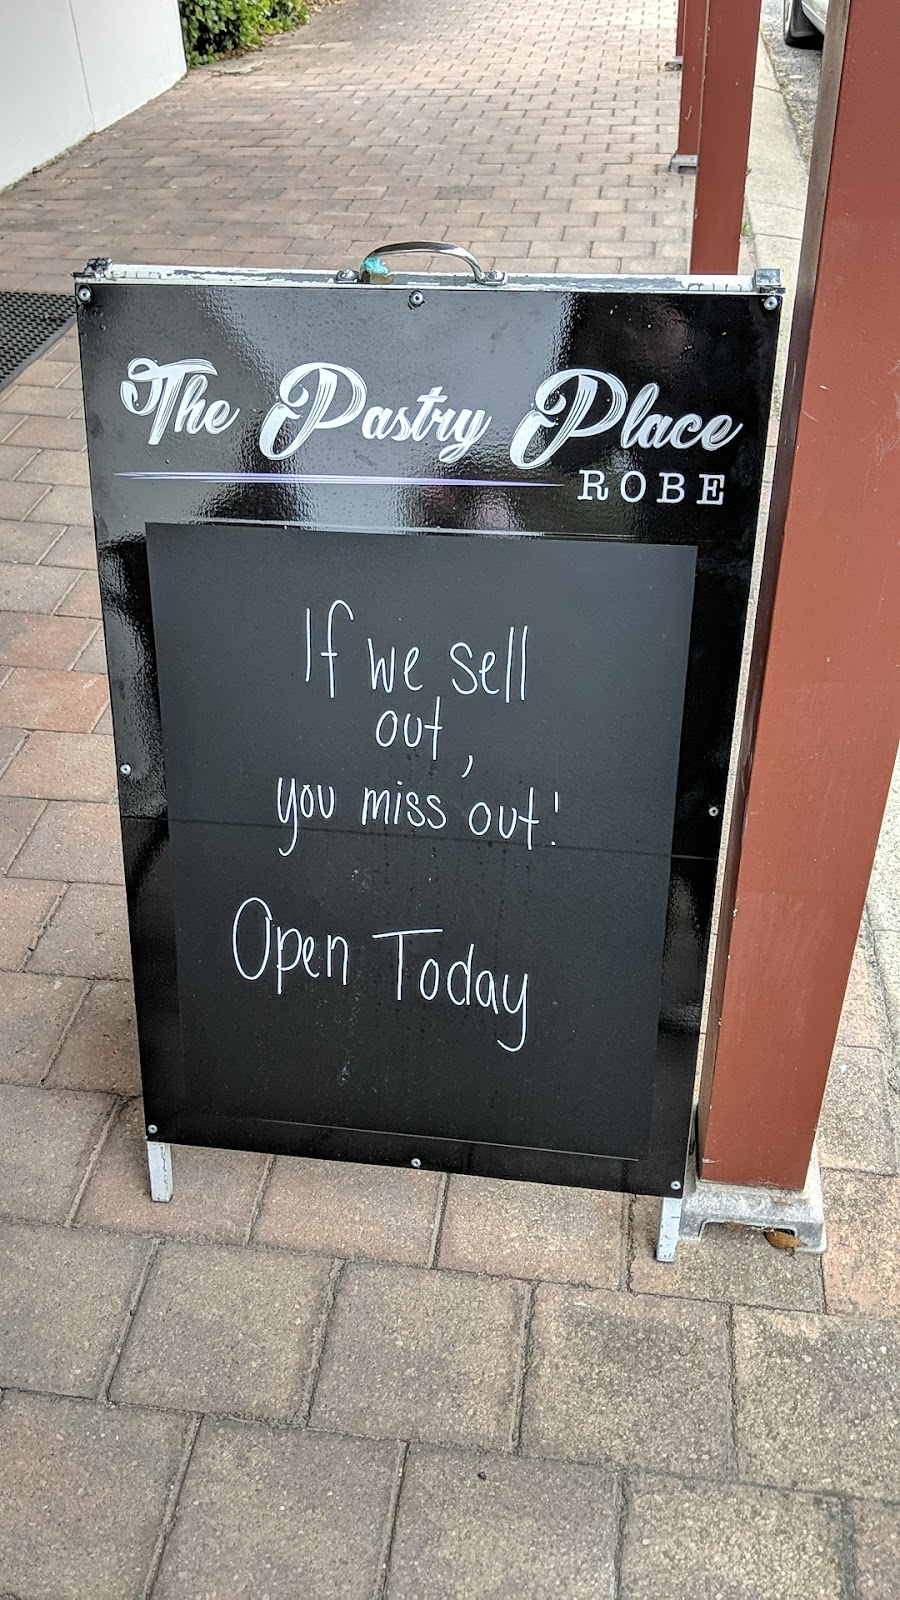 The Pastry Place Robe | cafe | 6 Union St, Robe SA 5276, Australia